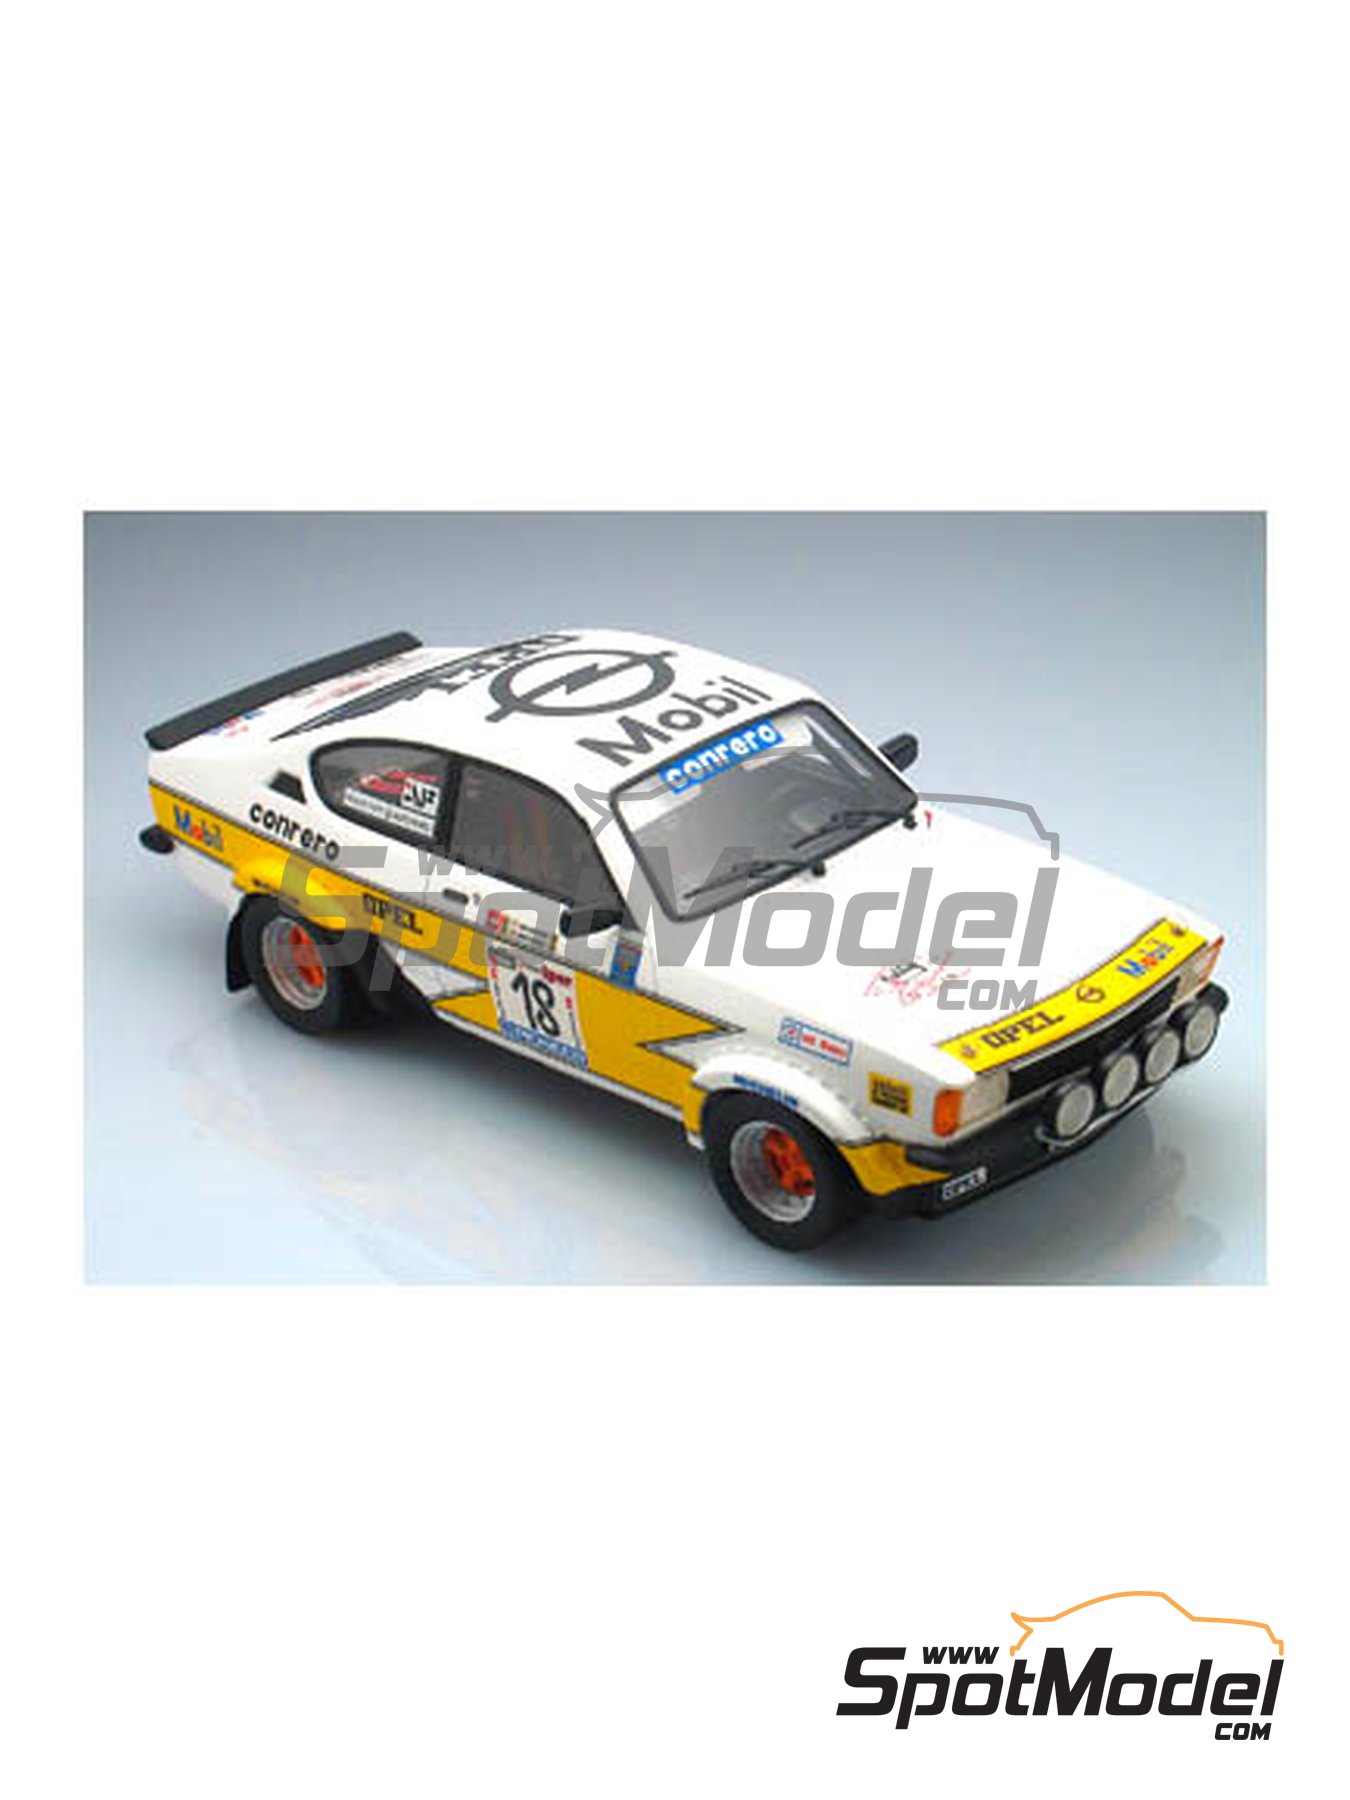 Opel Kadett GTE 2000 Group 2 Conrero Team sponsored by Mobil - Rally 4  Regioni 1979. Car scale model kit in 1/24 scale manufactured by Arena  Modelli (